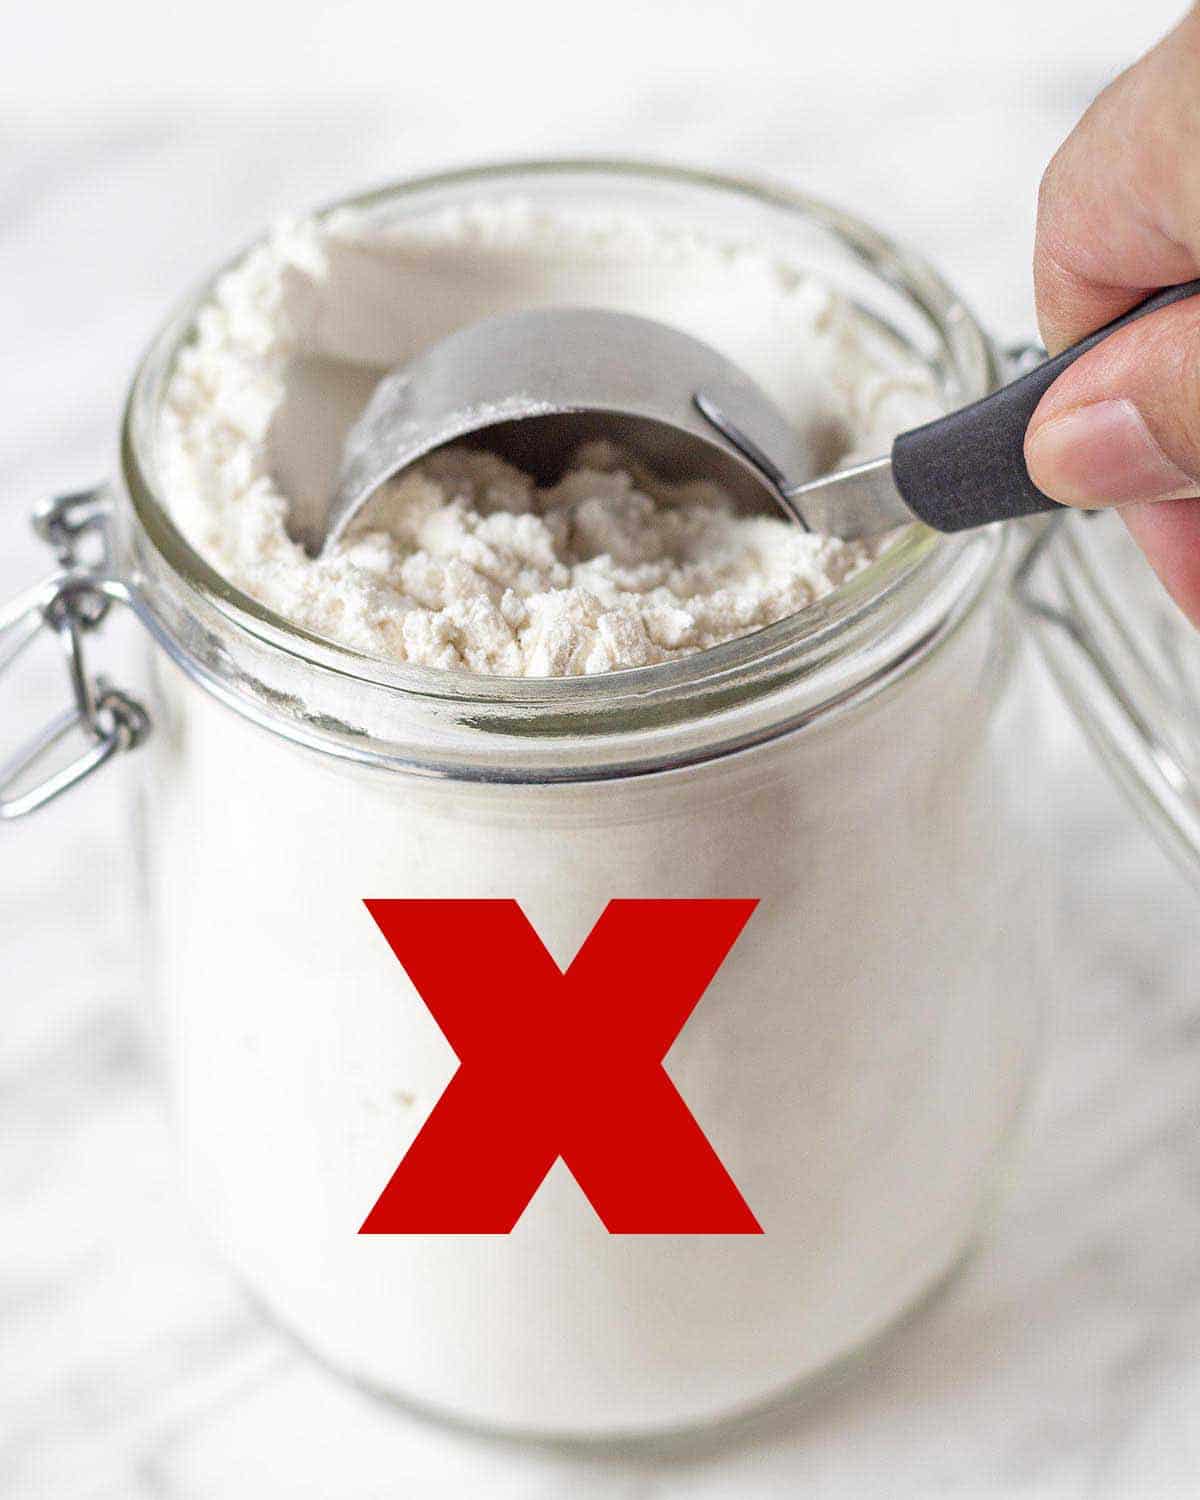 A hand scooping flour from a jar with a measuring cup, a red x is on the jar to show this is the wrong way to measure flour.